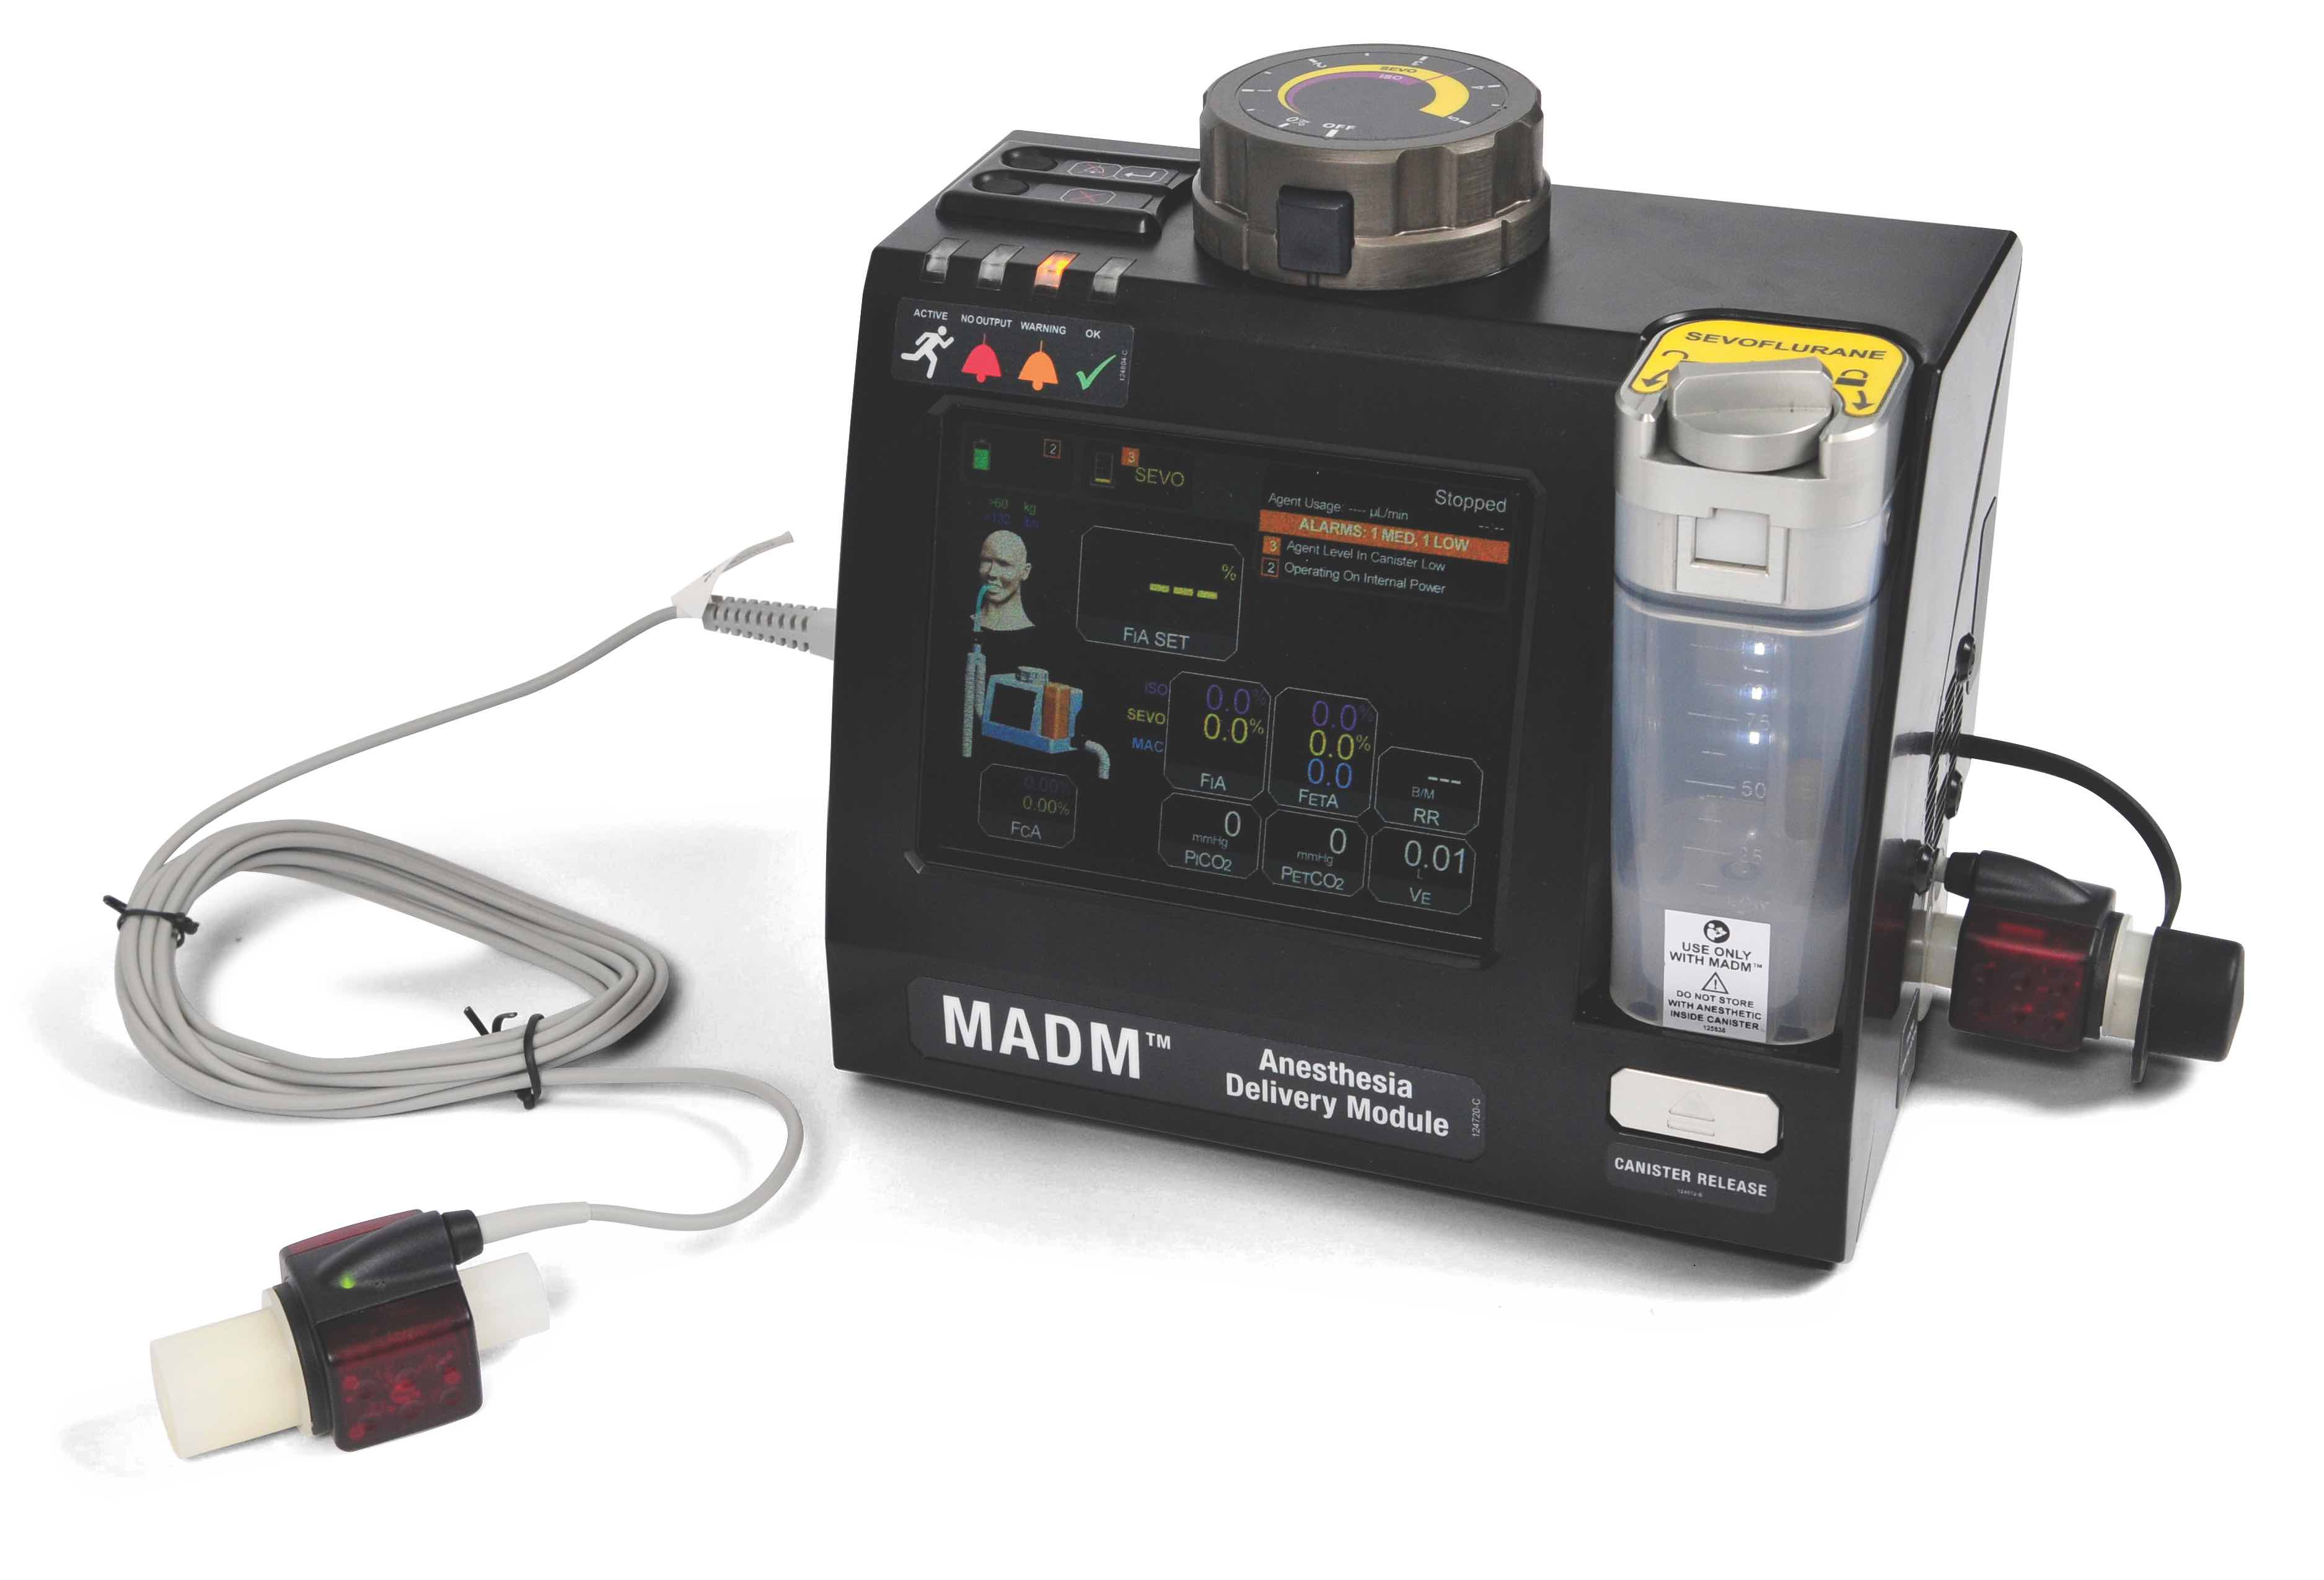 Thornhill Medical's Mobile Anesthesia Delivery Module (MADM™)